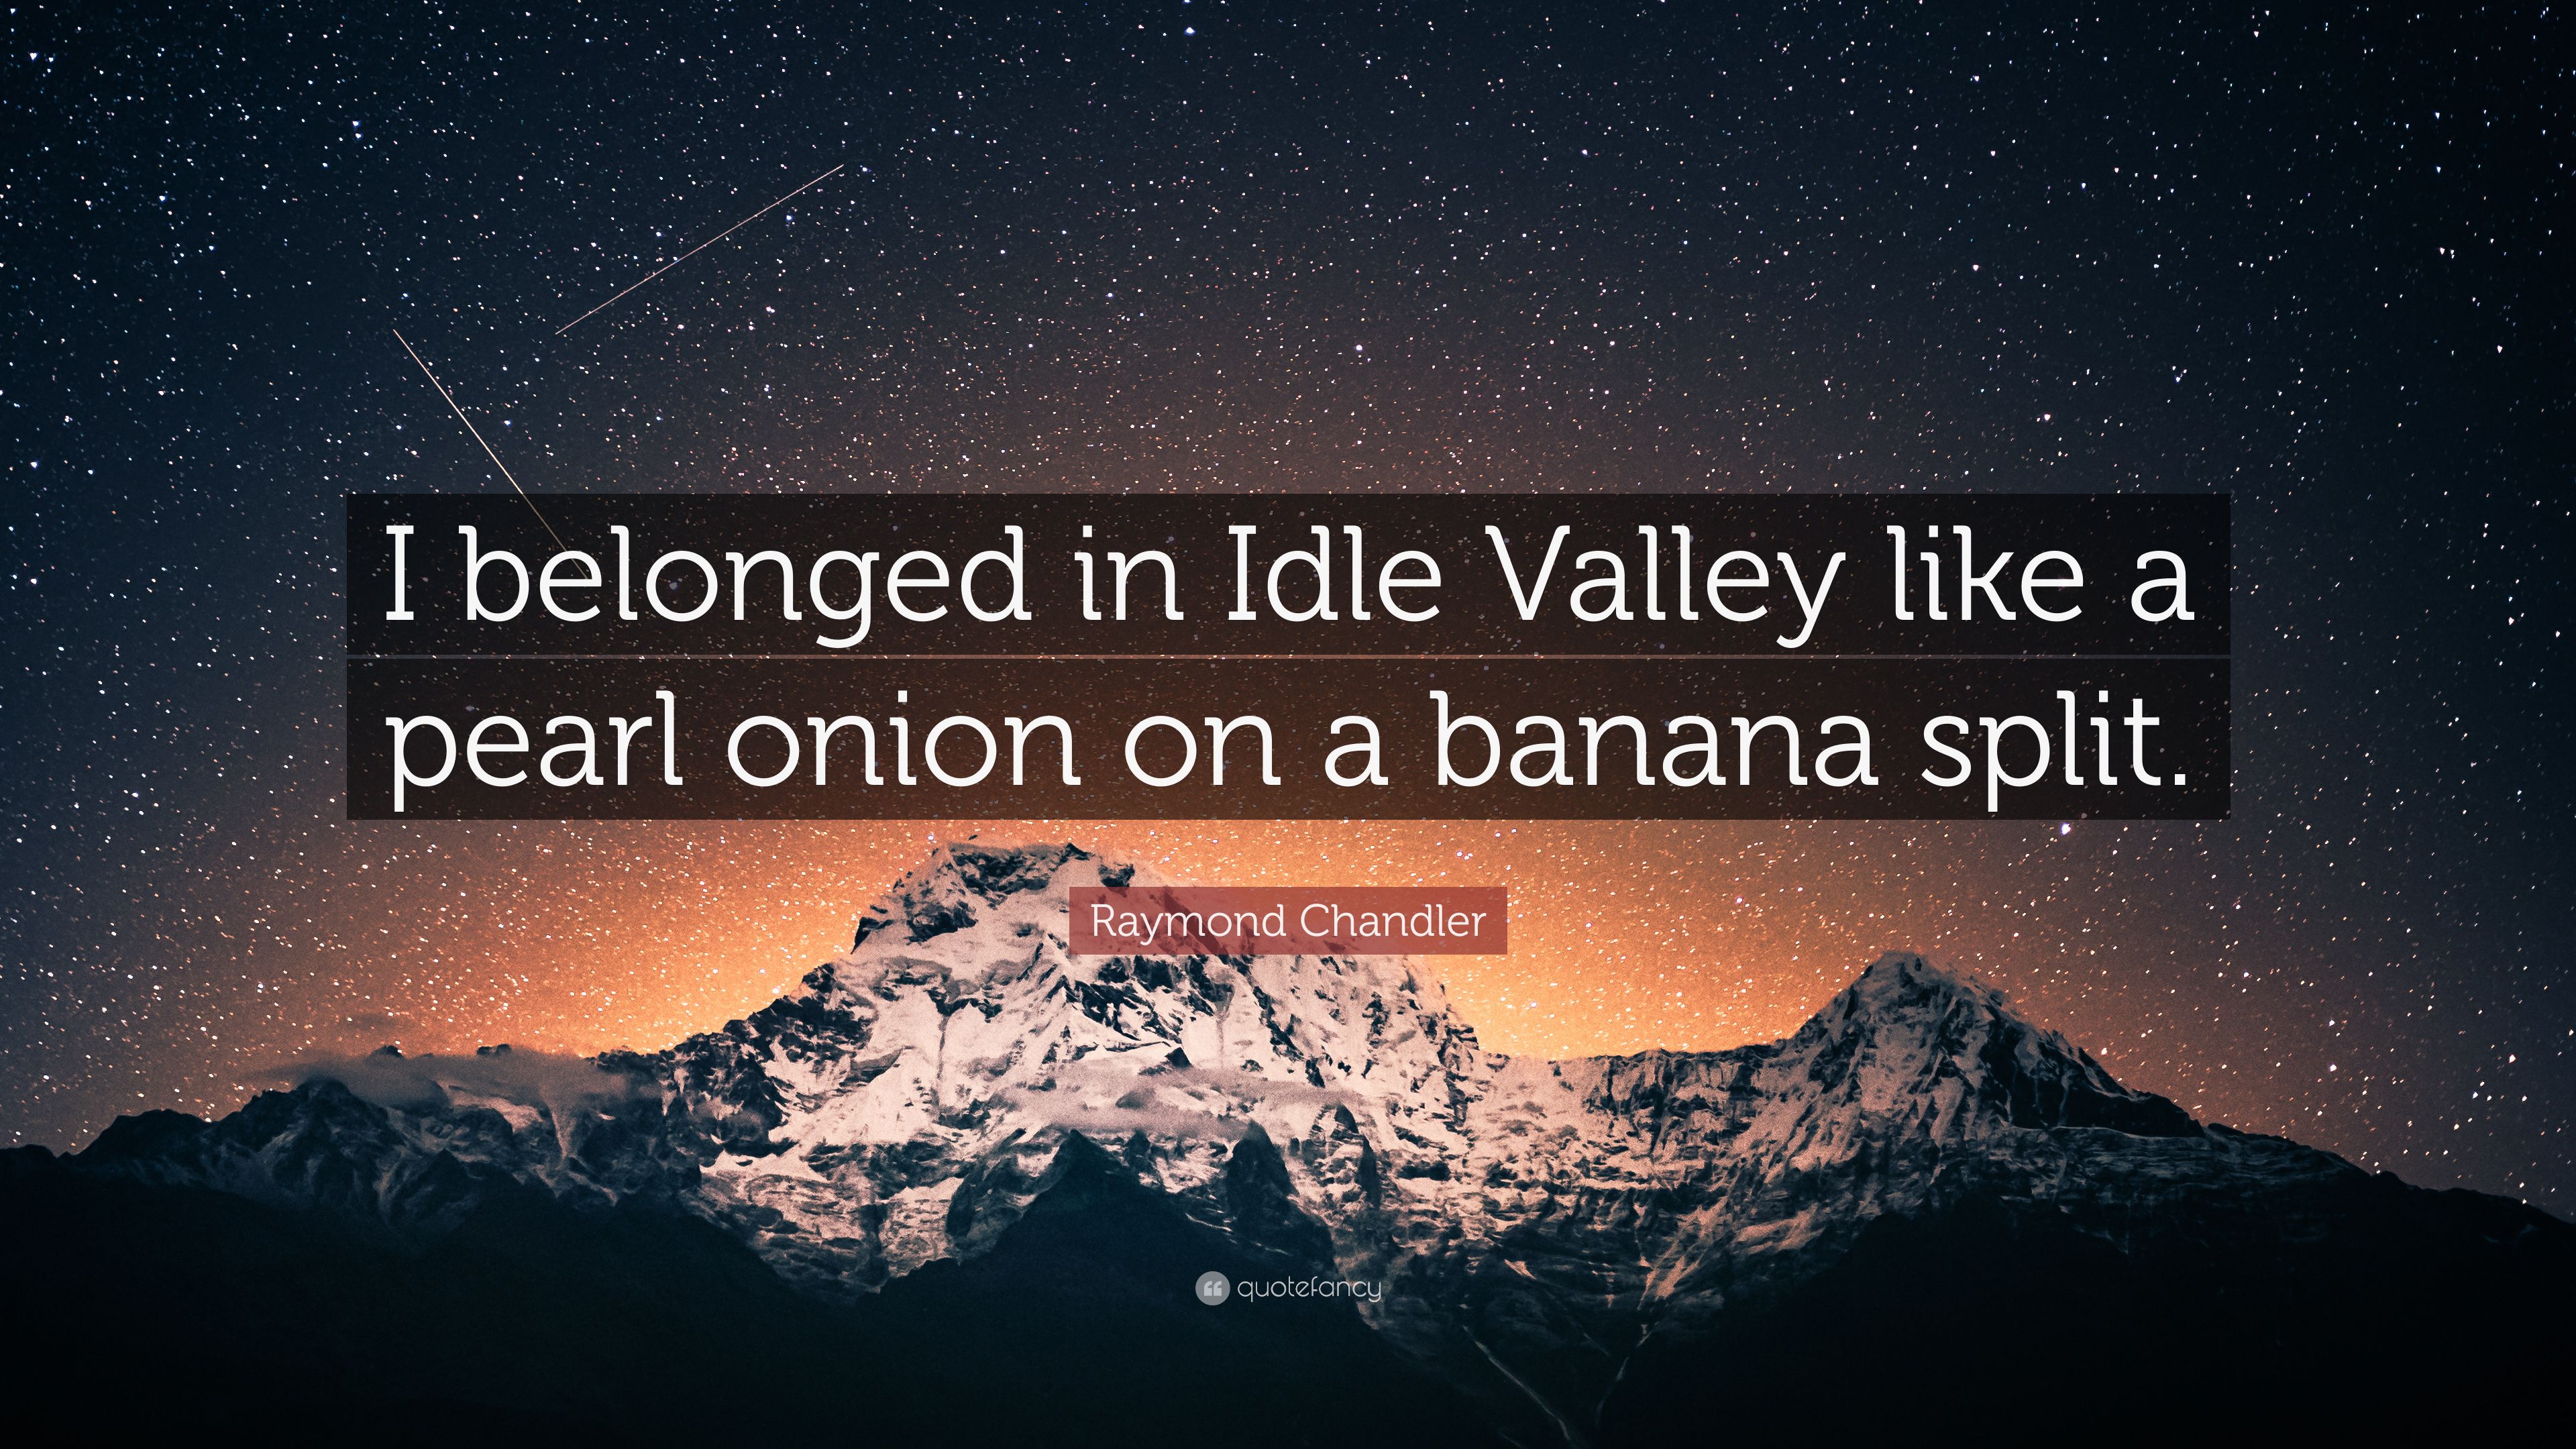 Raymond Chandler Quote: “I belonged in Idle Valley like a pearl